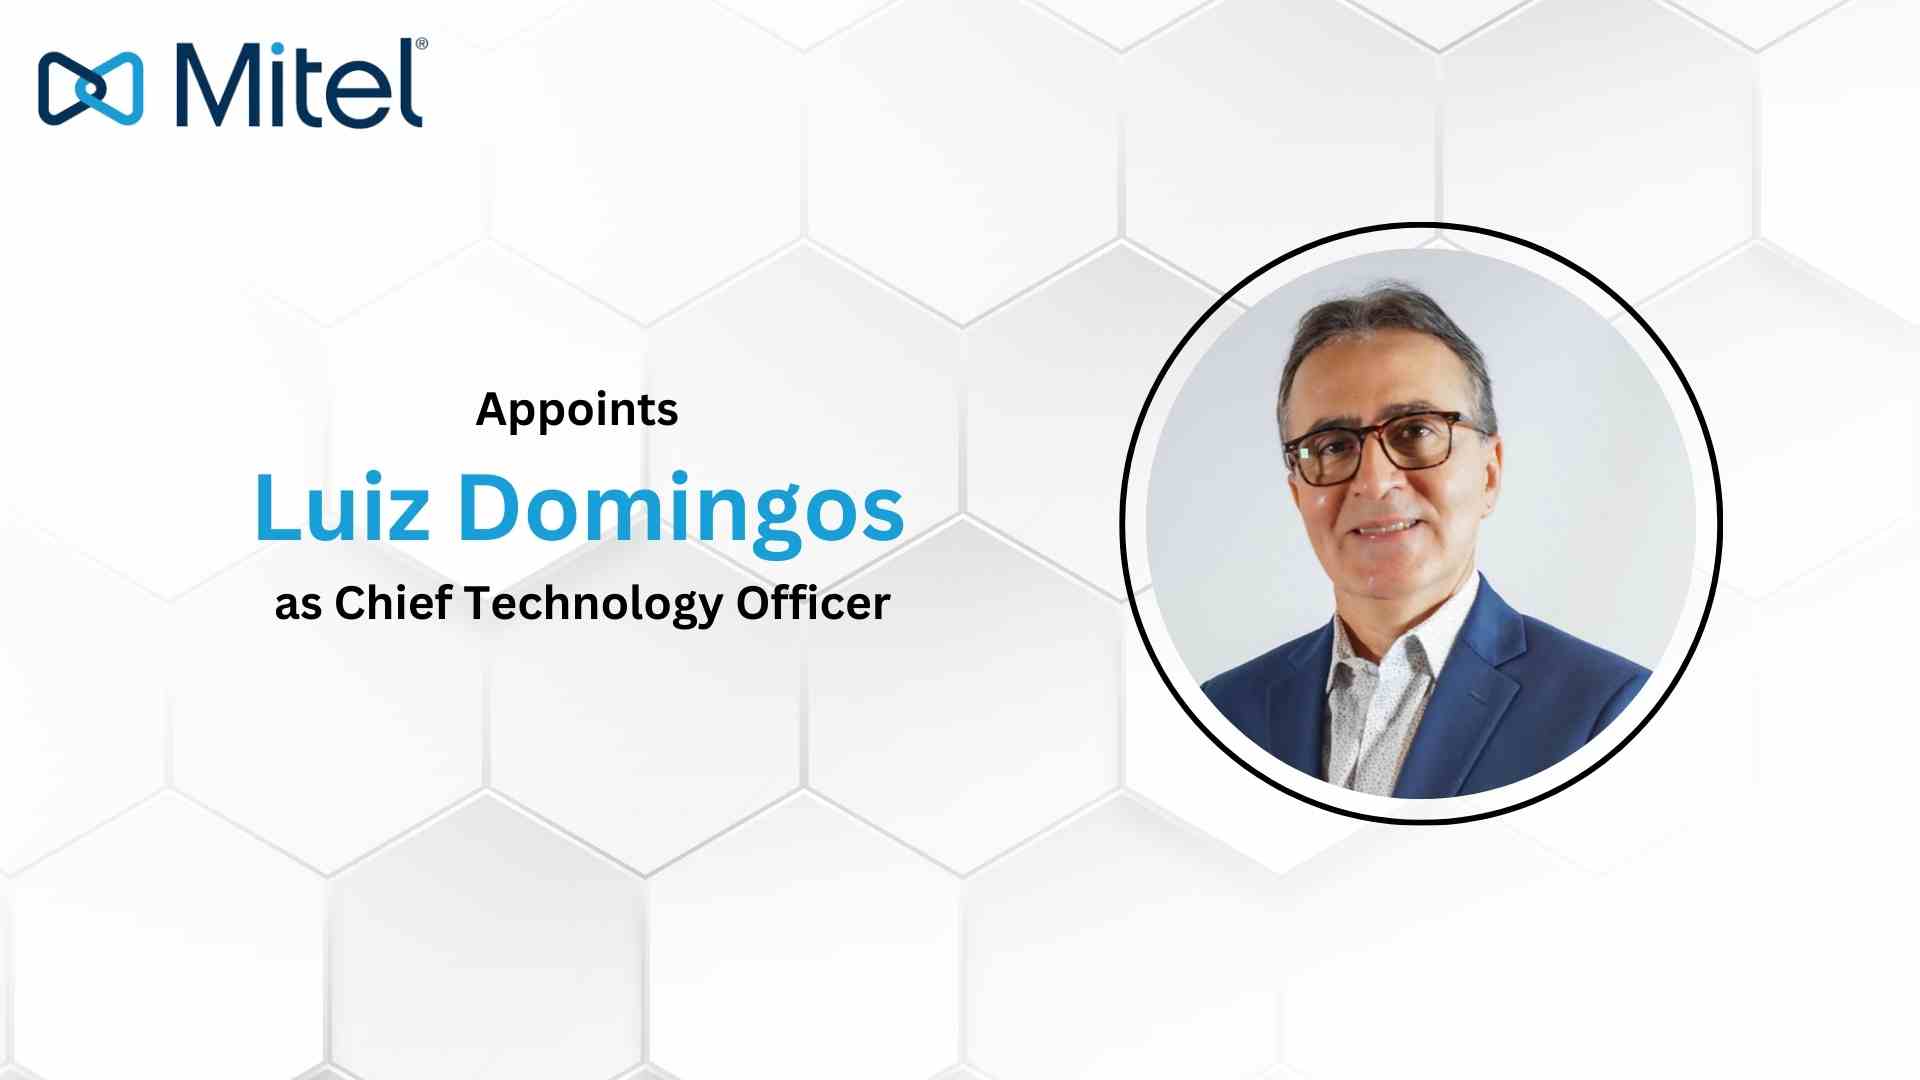 Mitel Appoints Luiz Domingos as Chief Technology Officer